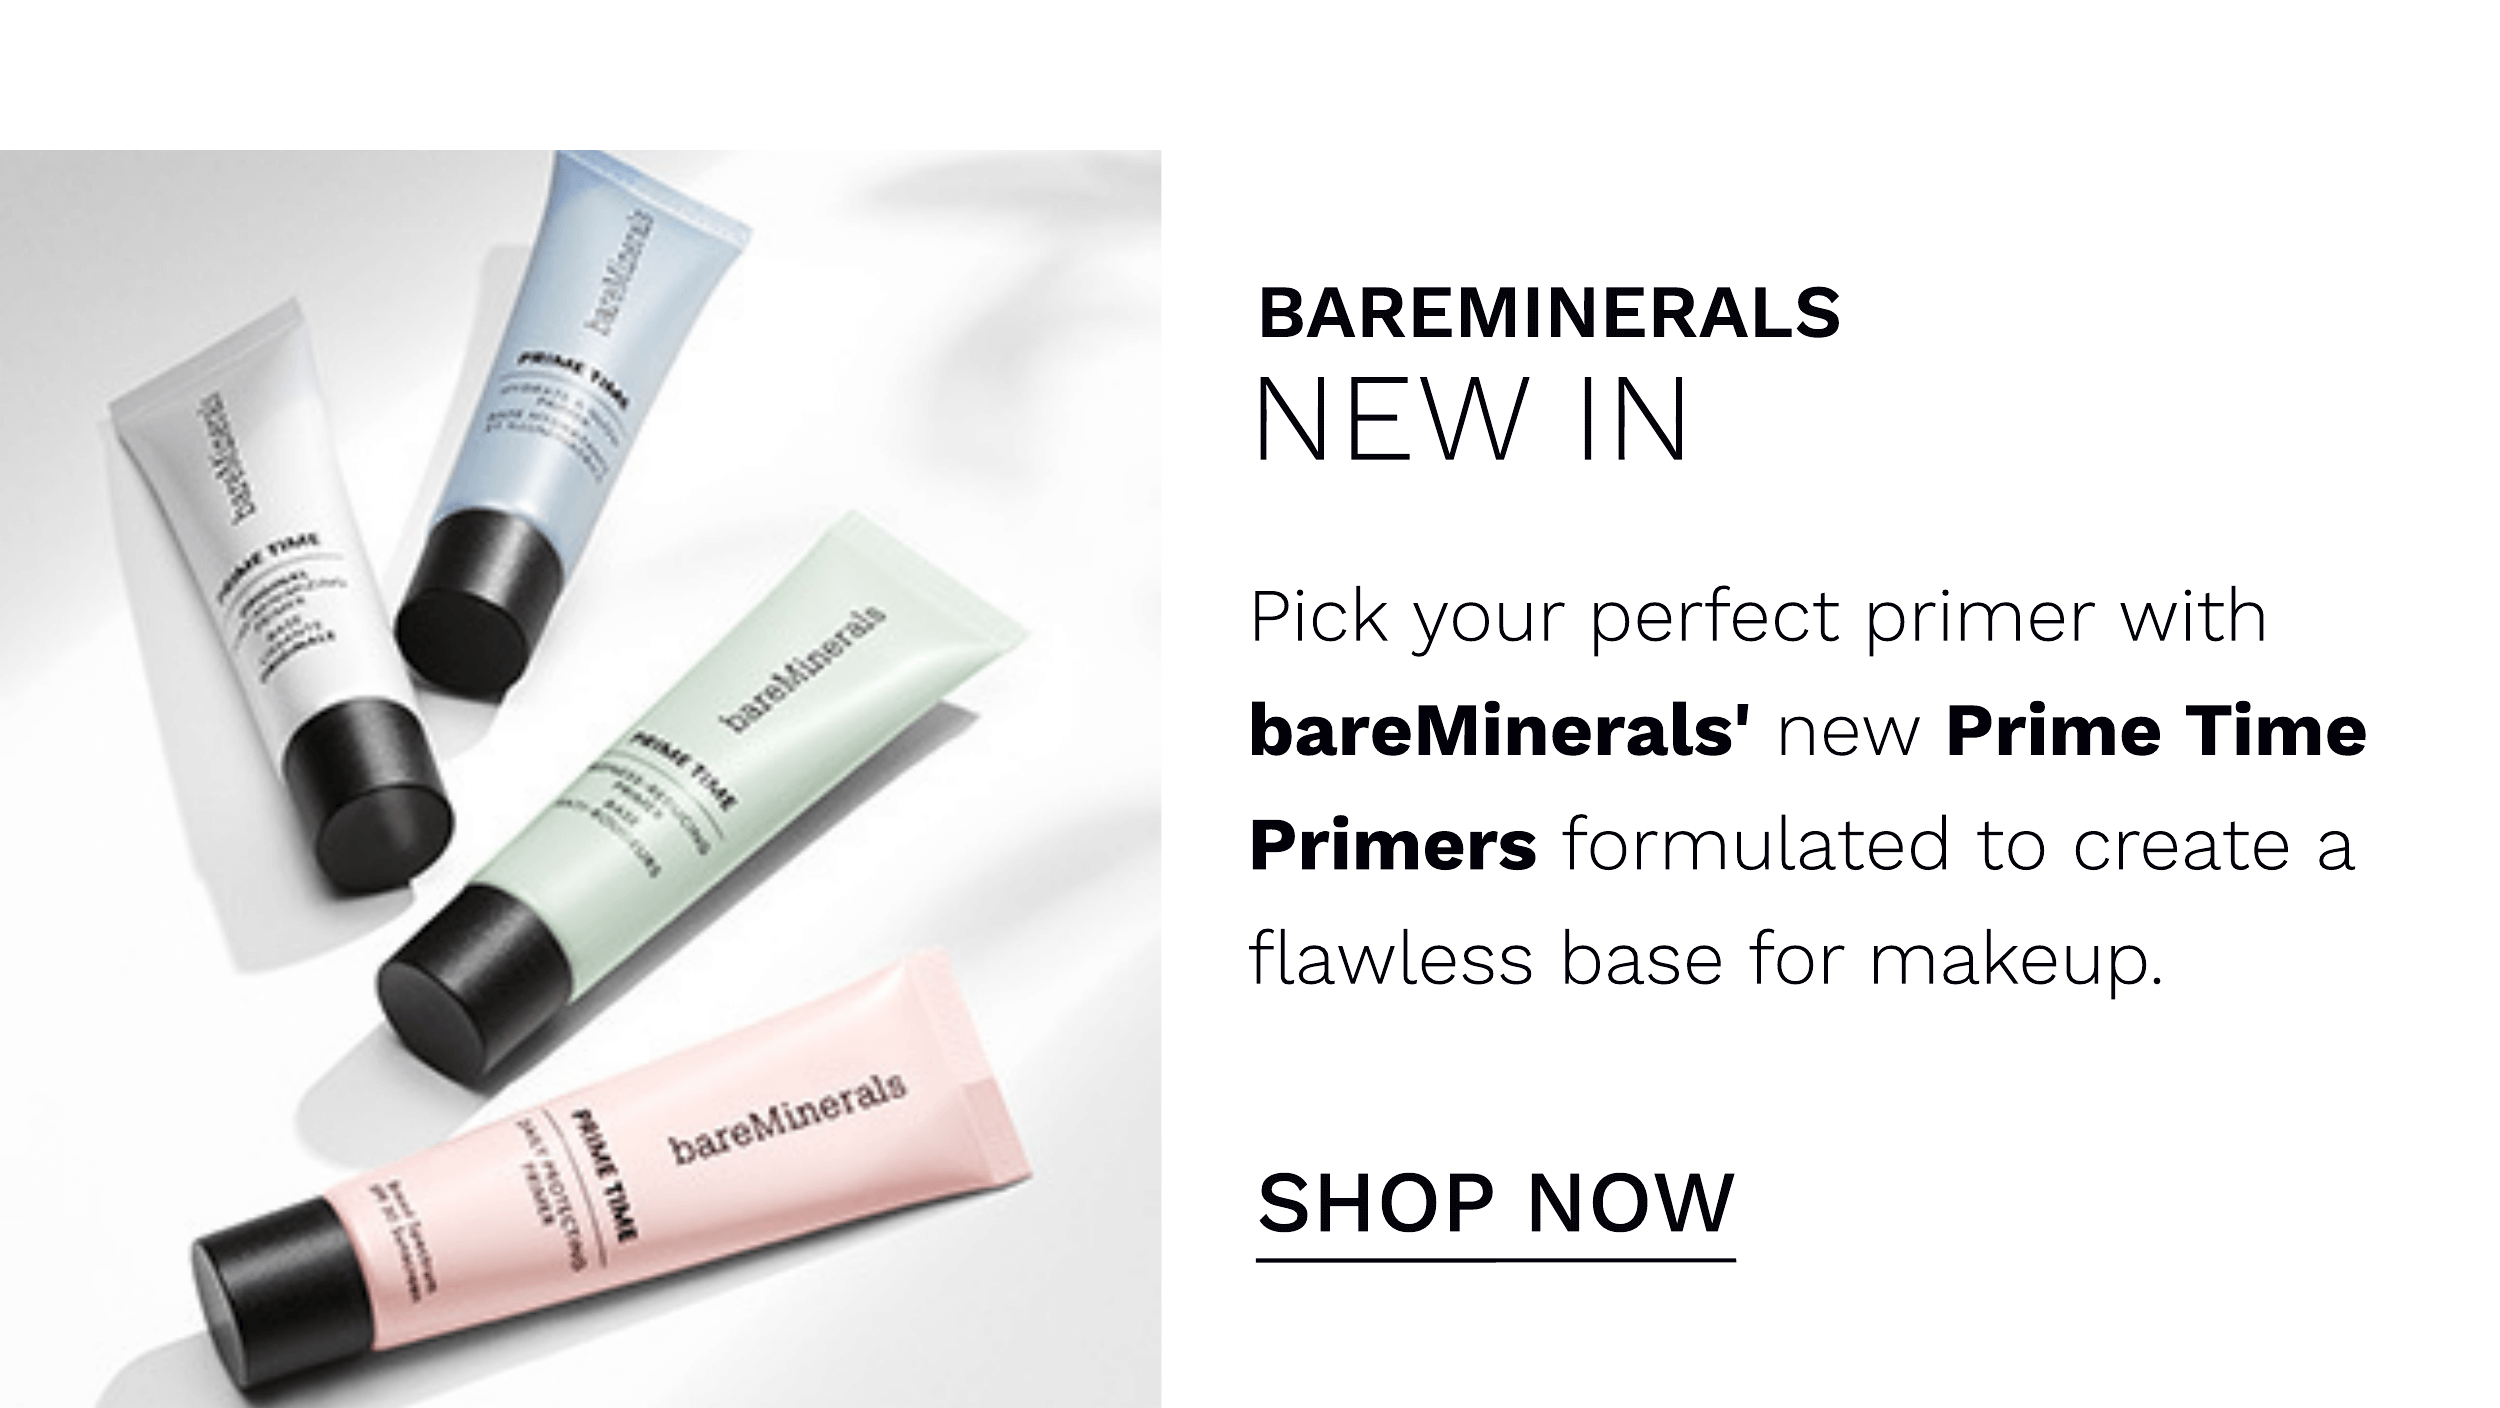  BAREMINERALS NEW IN Pick your perfect primer with bareMinerals' new Prime Time Primers formulated to create a flawless base for makeup. SHOP NOW 